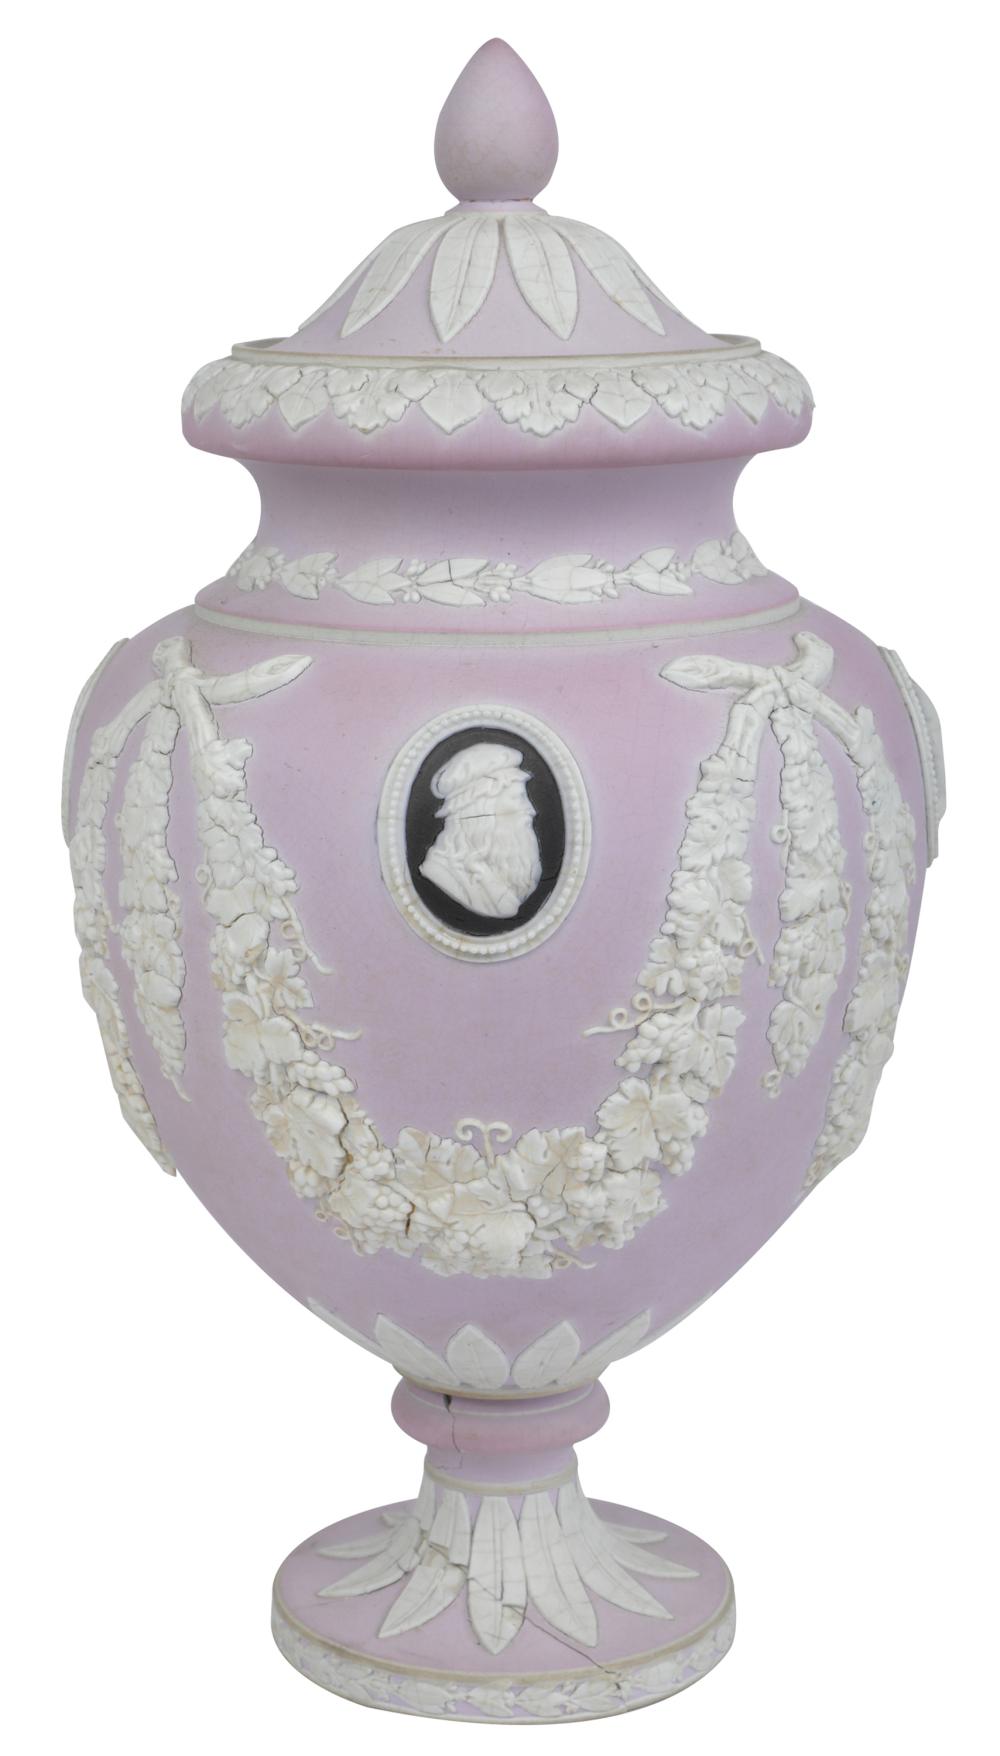 ADAMS & CO PORCELAIN COVERED URNlate